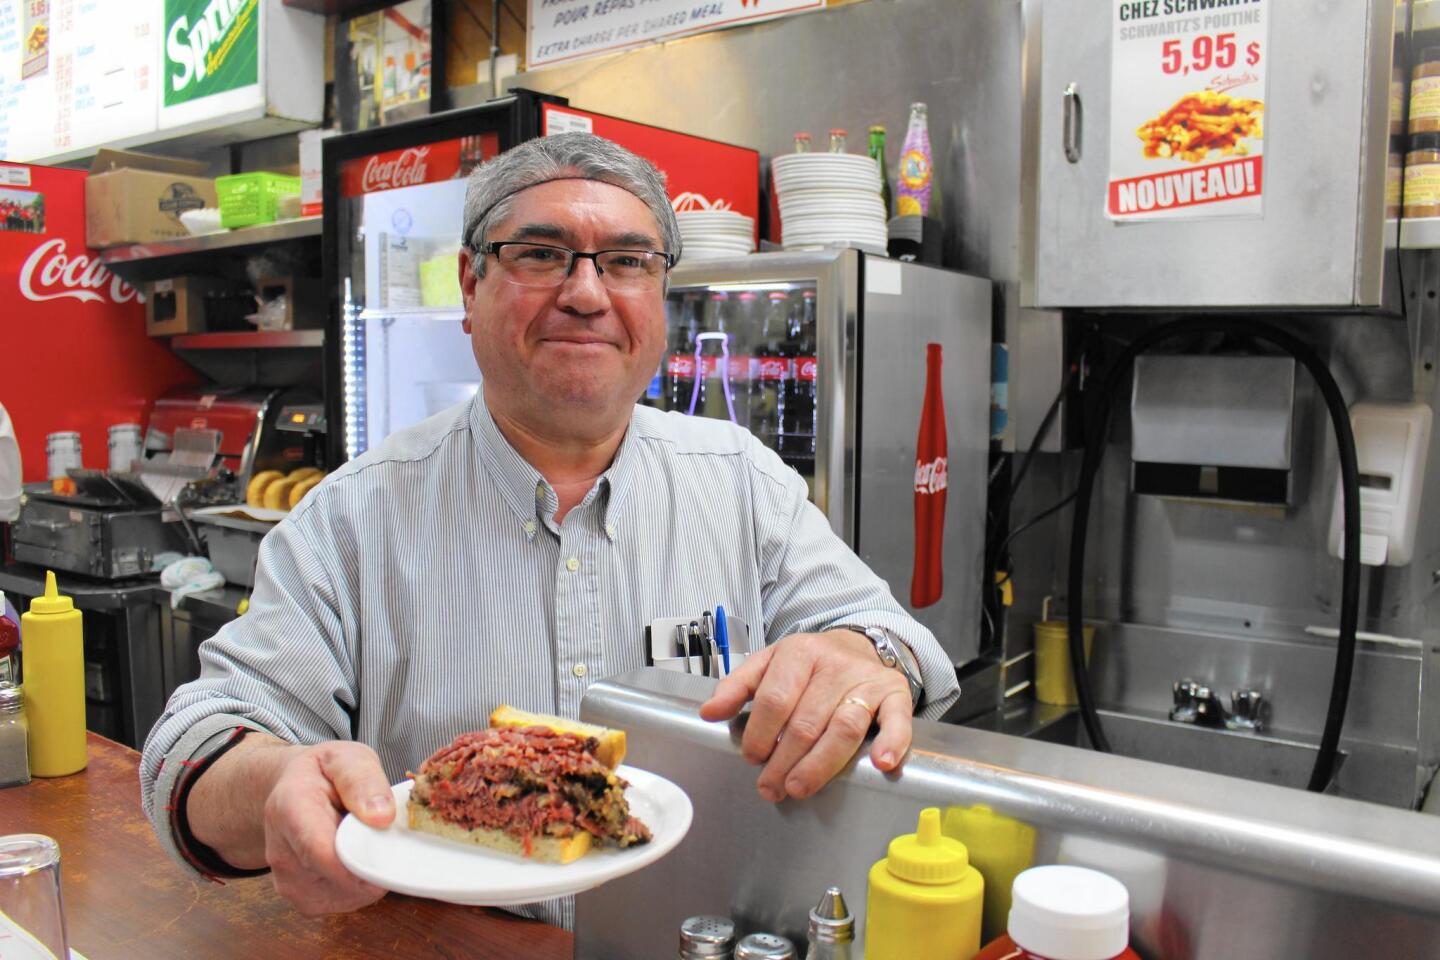 Joao Goncalves serves up one of Schwartz’s legendary smoked meat sandwiches — a half, actually — just as servers have done here since 1928.